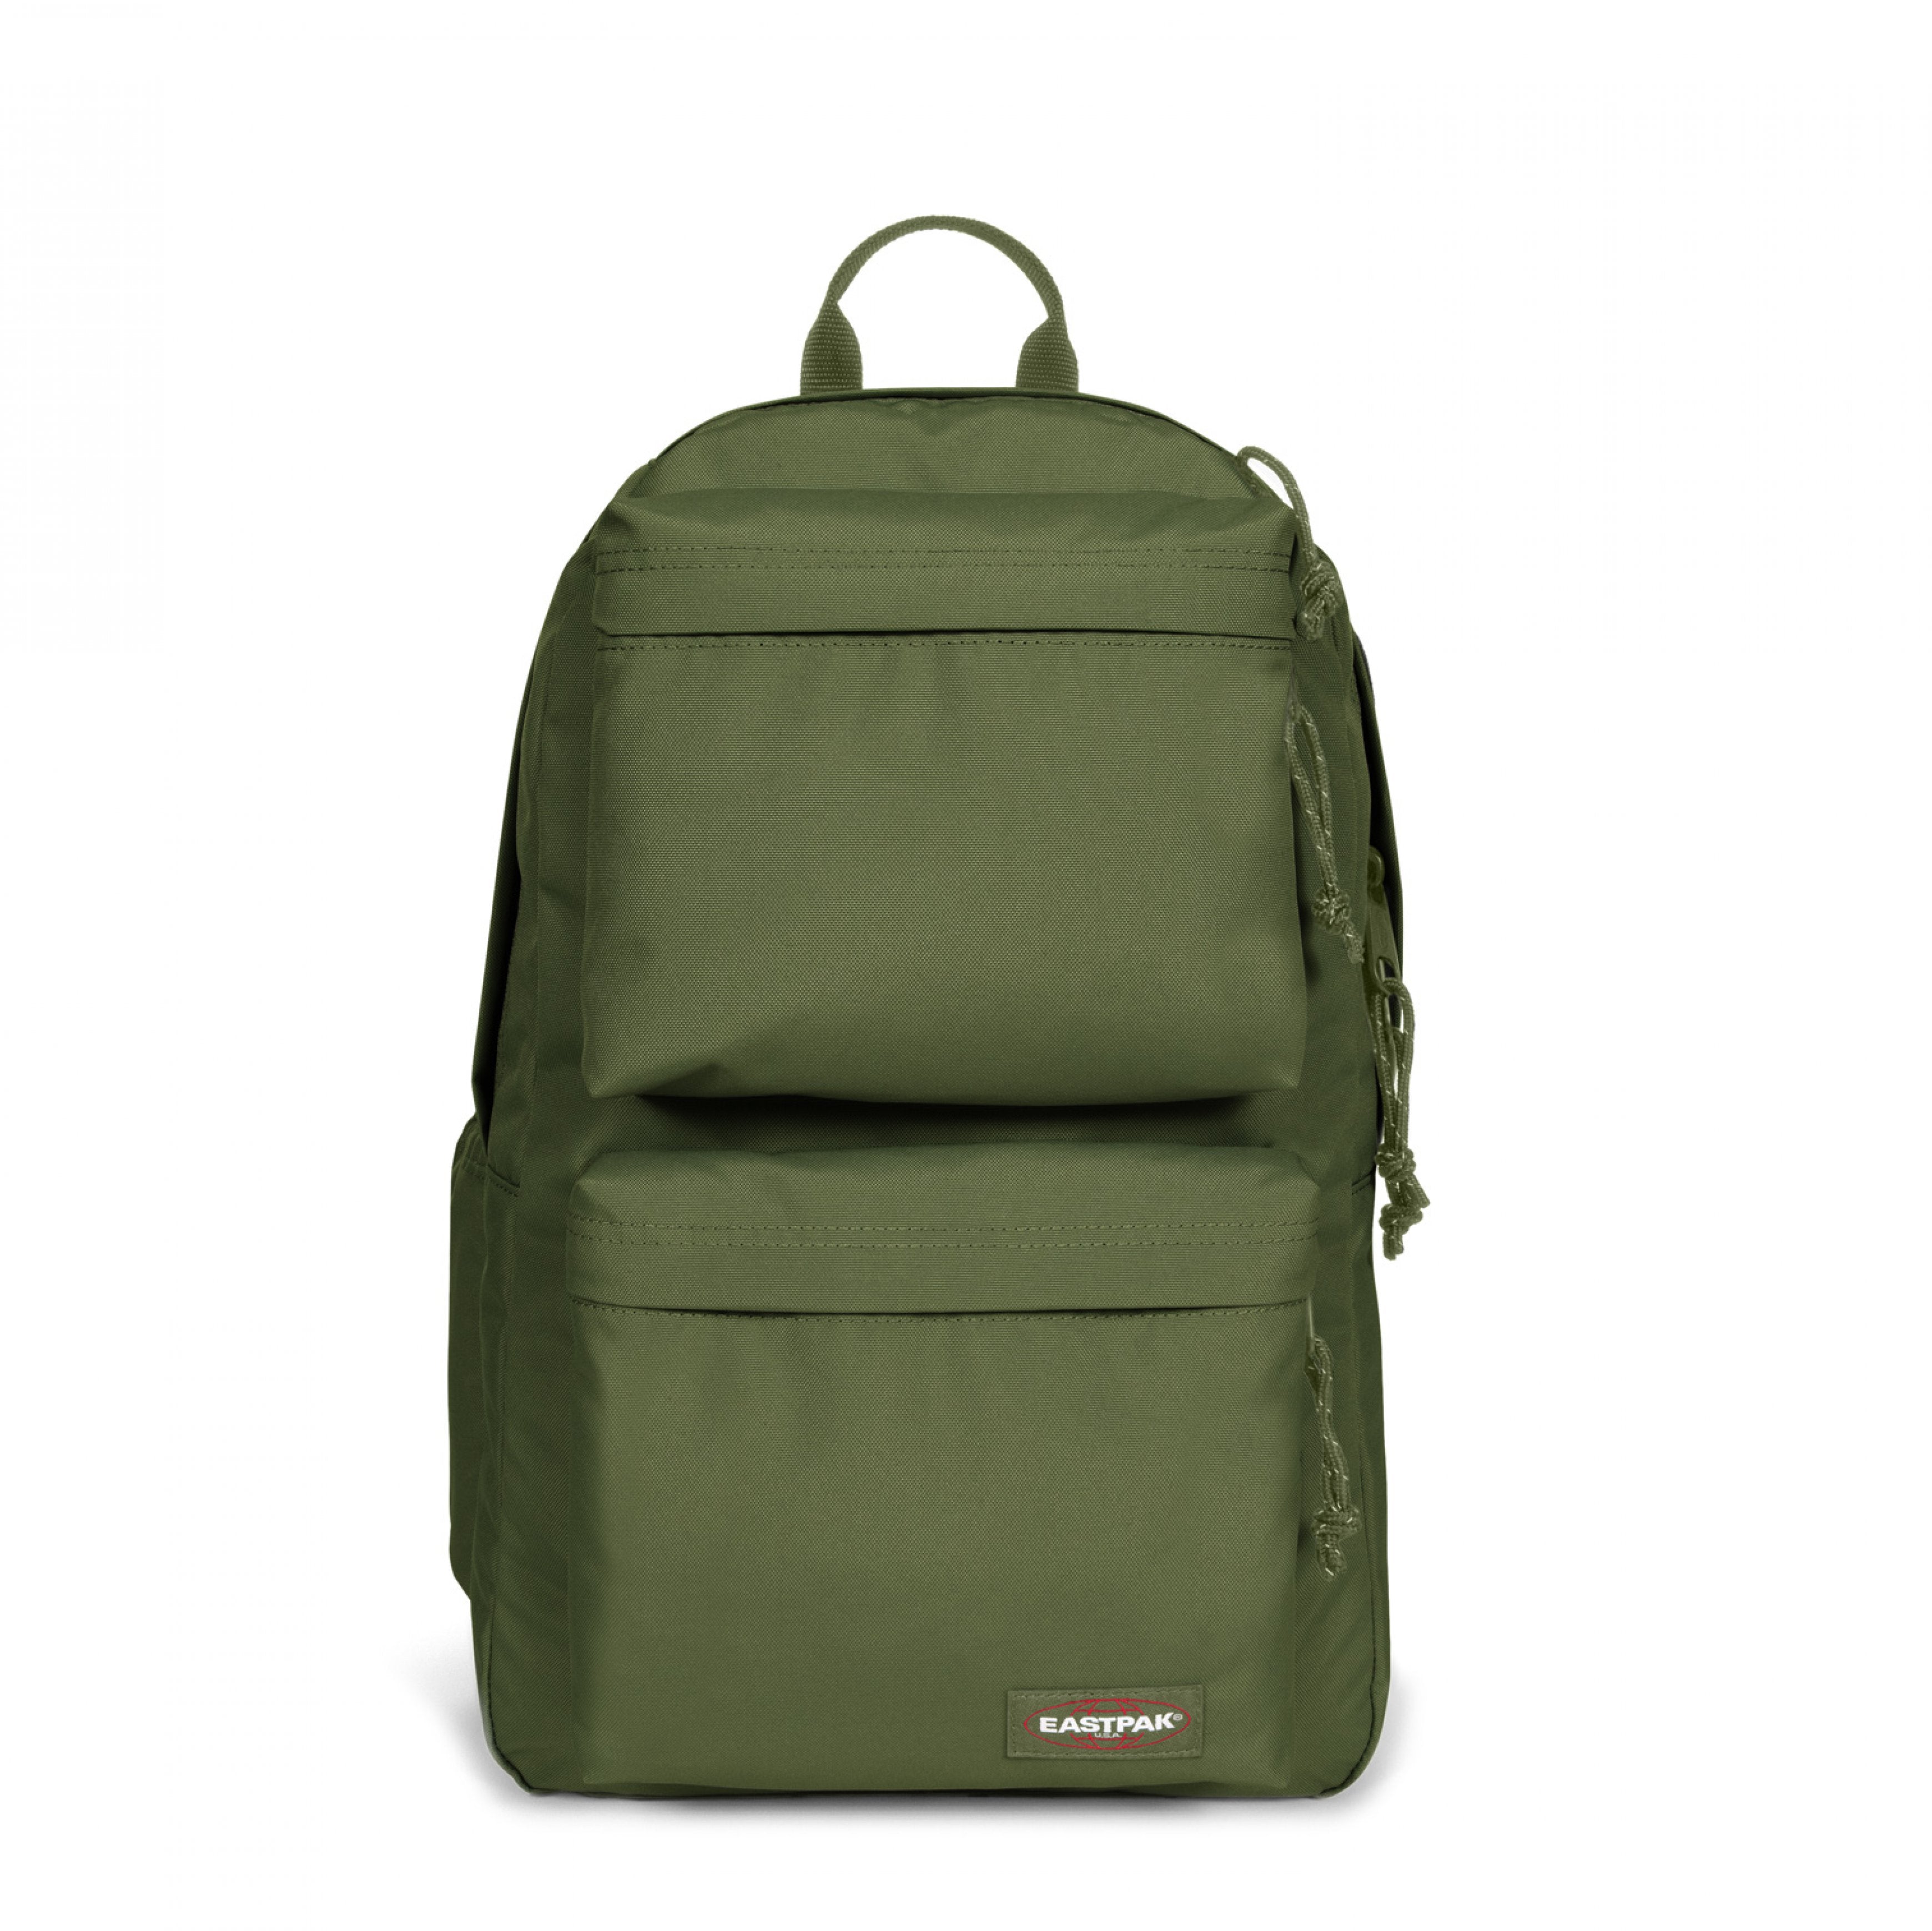 Parton Dark Grass Backpack Front View